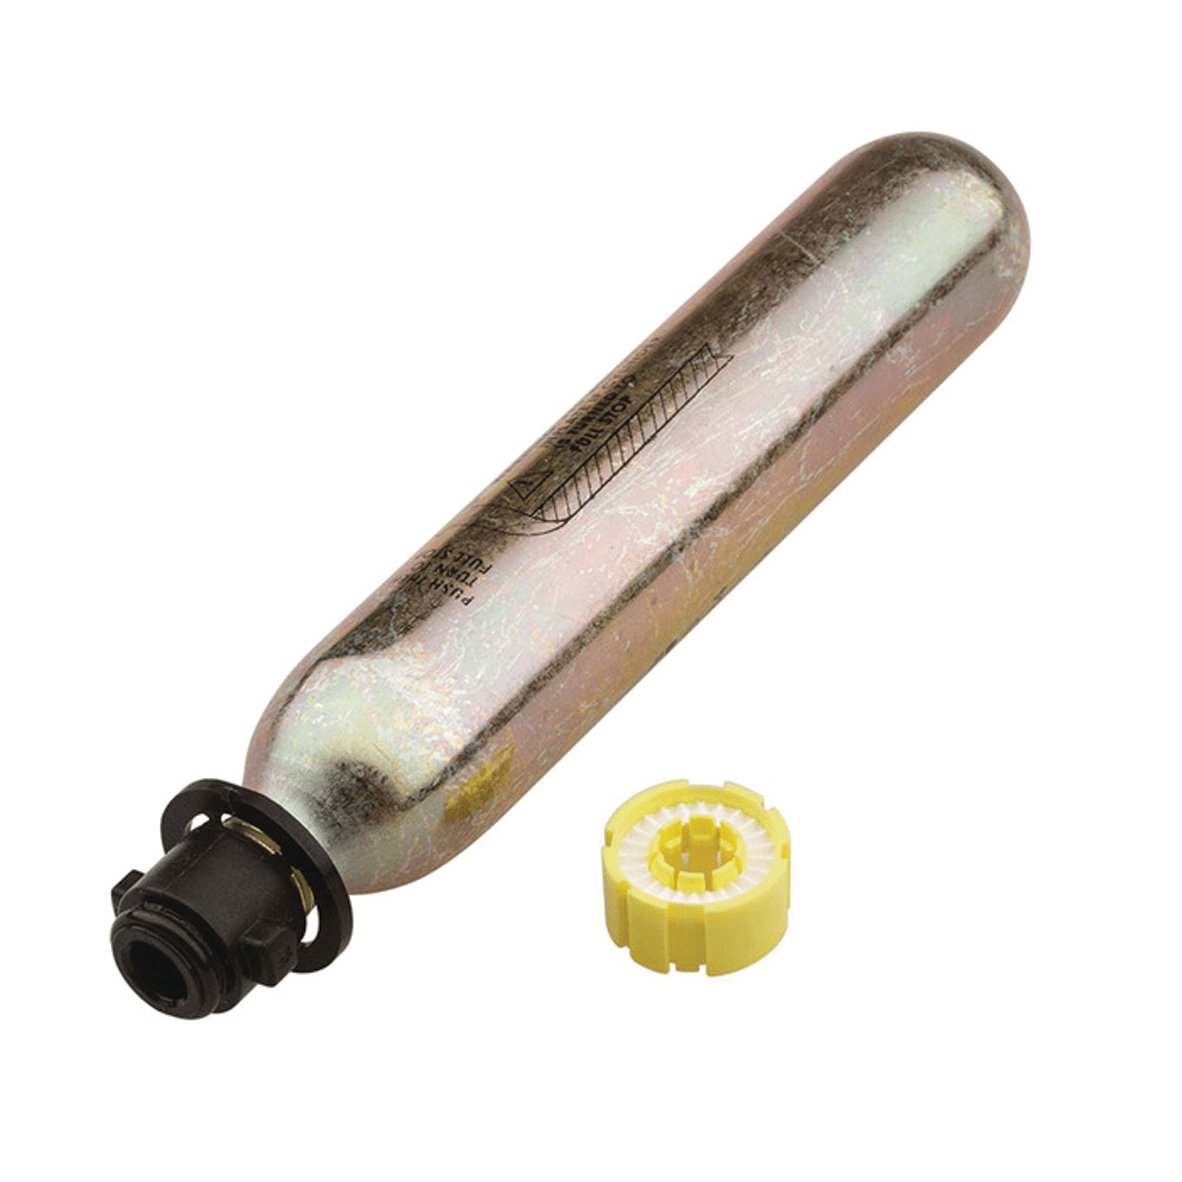 Automatic In-Sight 33 gm Rearming Kit - 1362